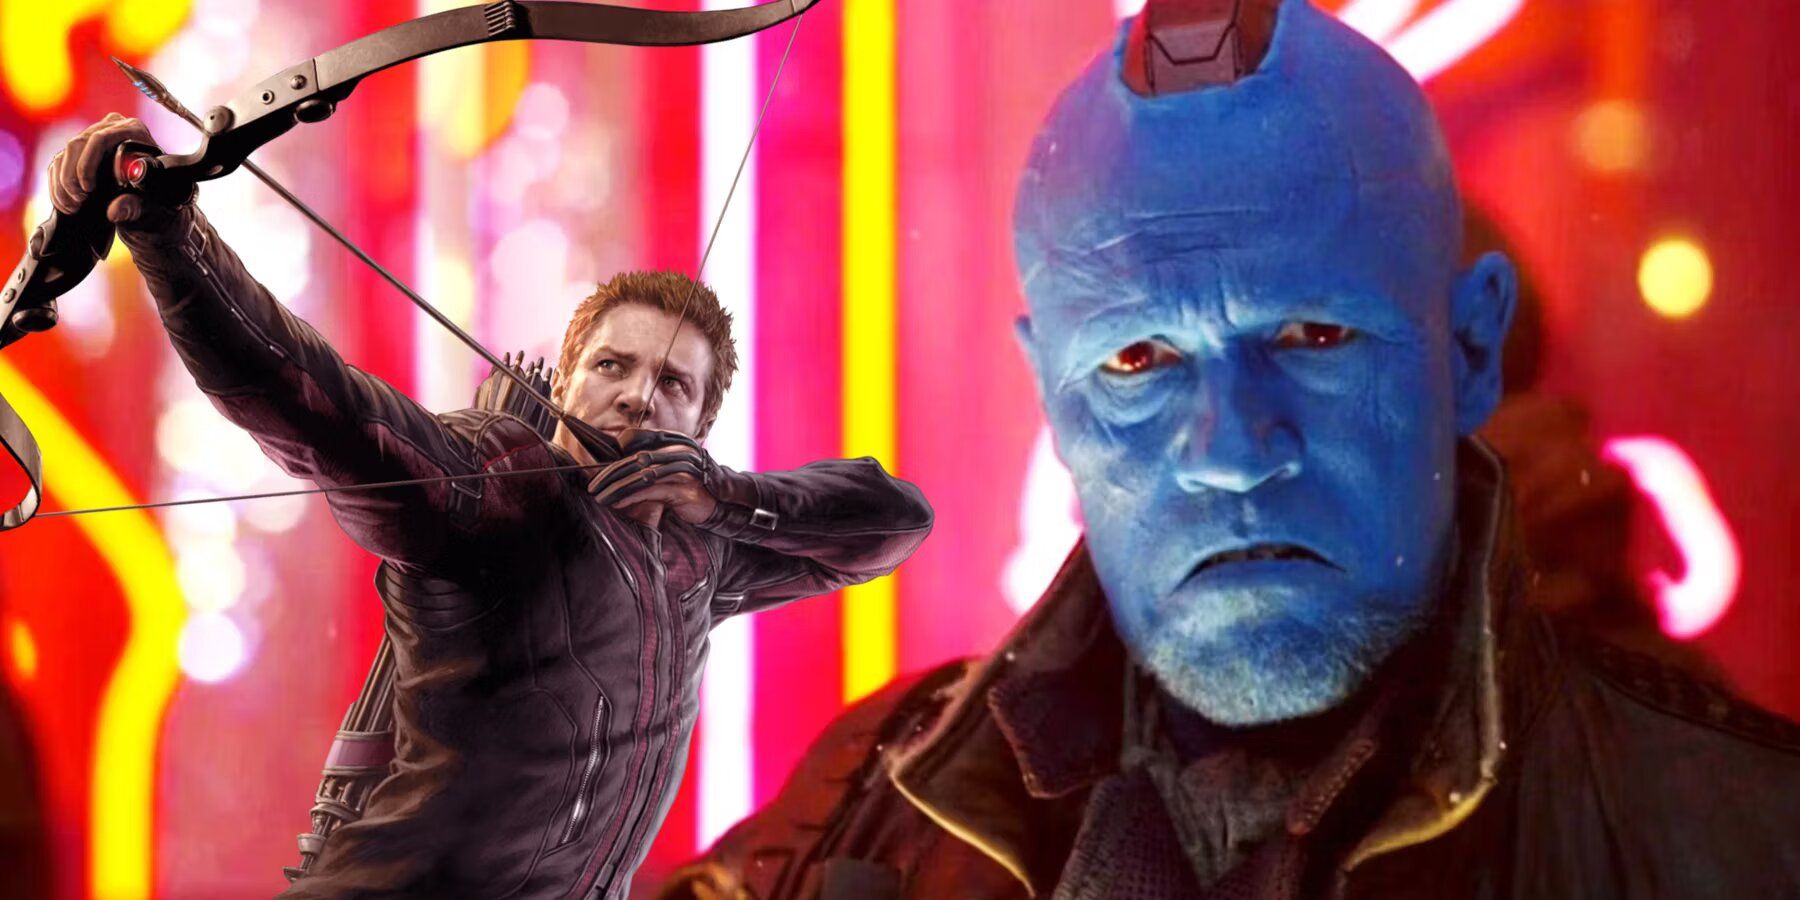 Custom Image of Hawkeye and Yondu from the Marvel Cinematic Universe